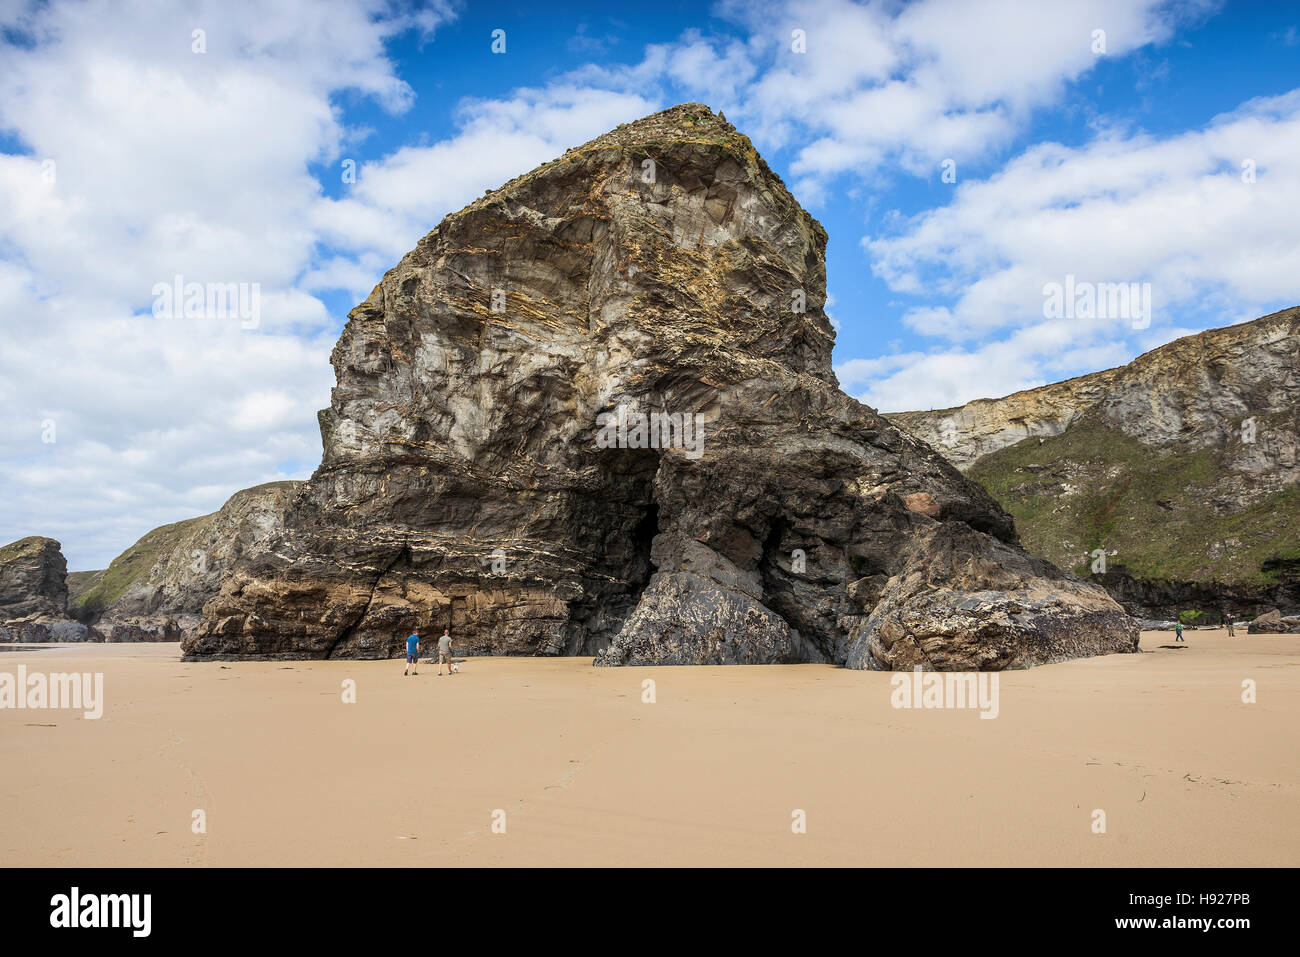 One of the iconic rock stacks at Bedruthan Steps towers over the tiny figures of tourists. Stock Photo